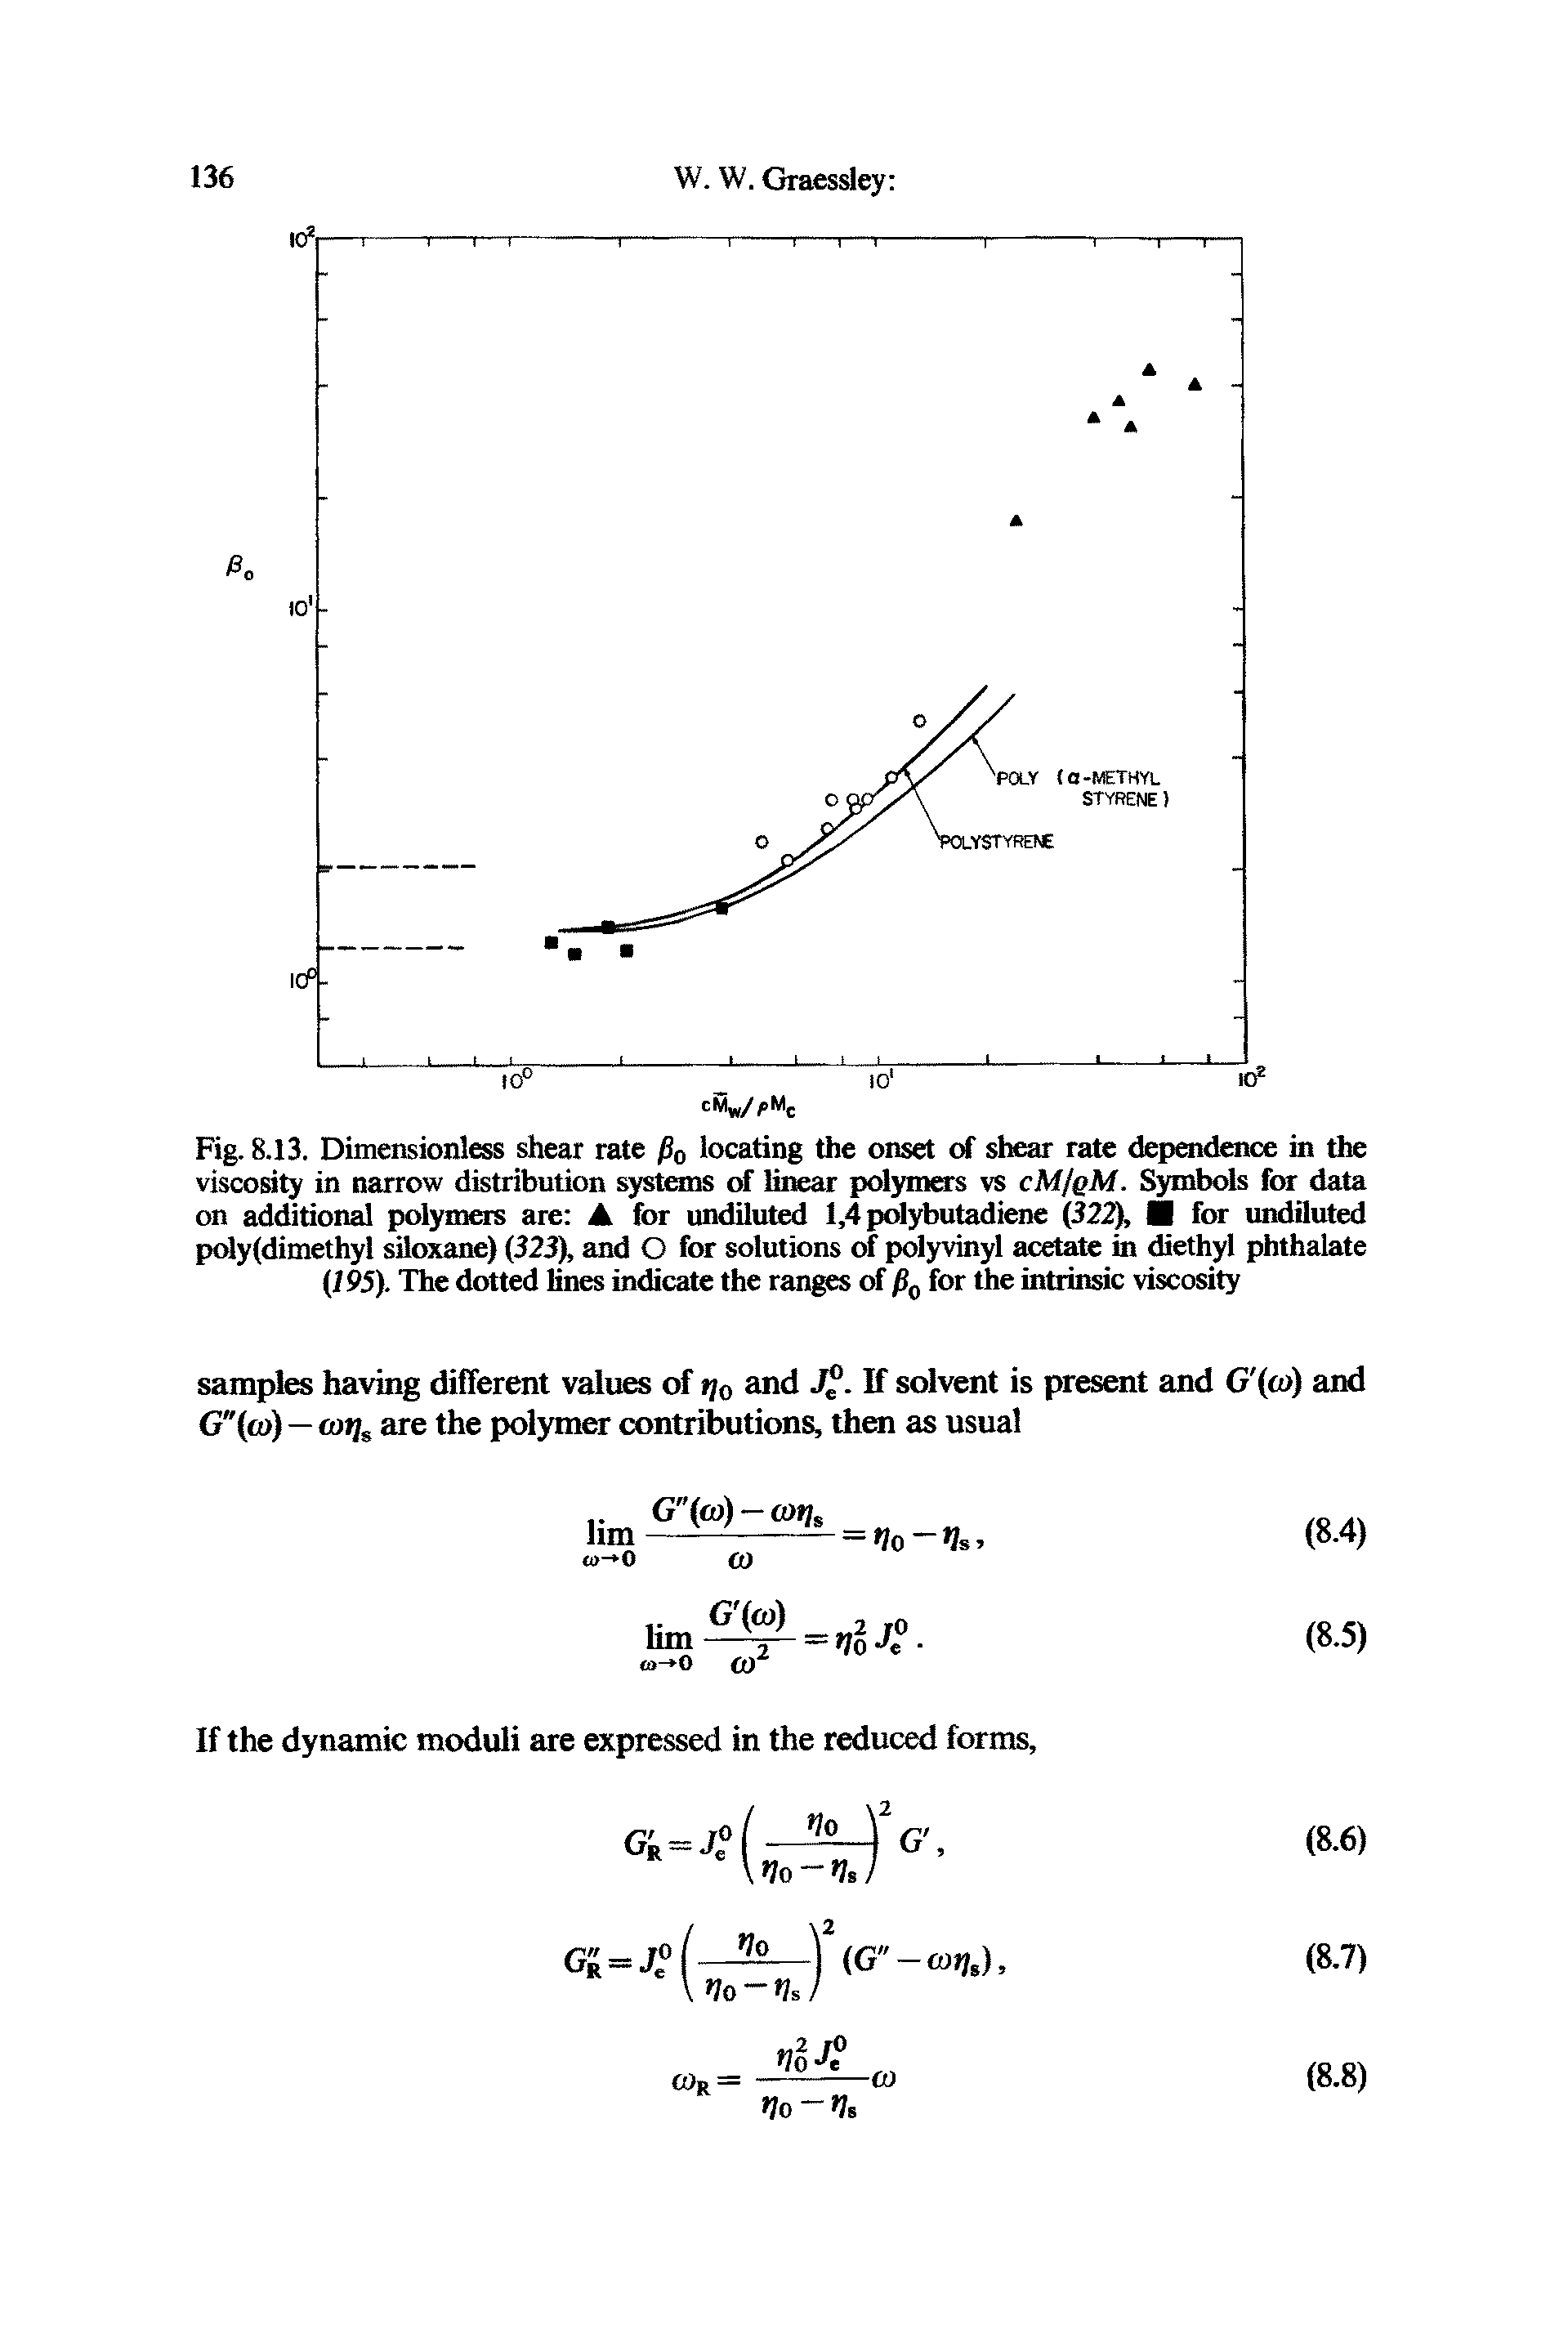 Fig. 8.13. Dimensionless shear rate /30 locating the onset of shear rate dependence in the viscosity in narrow distribution systems of linear polymers vs cM/qM. Symbols for data on additional polymers are A for undiluted 1,4 polybutadiene (322), for undiluted poly(dimethyl siloxane) (323), and O for solutions of polyvinyl acetate in diethyl phthalate (195). The dotted lines indicate the ranges of for the intrinsic viscosity...